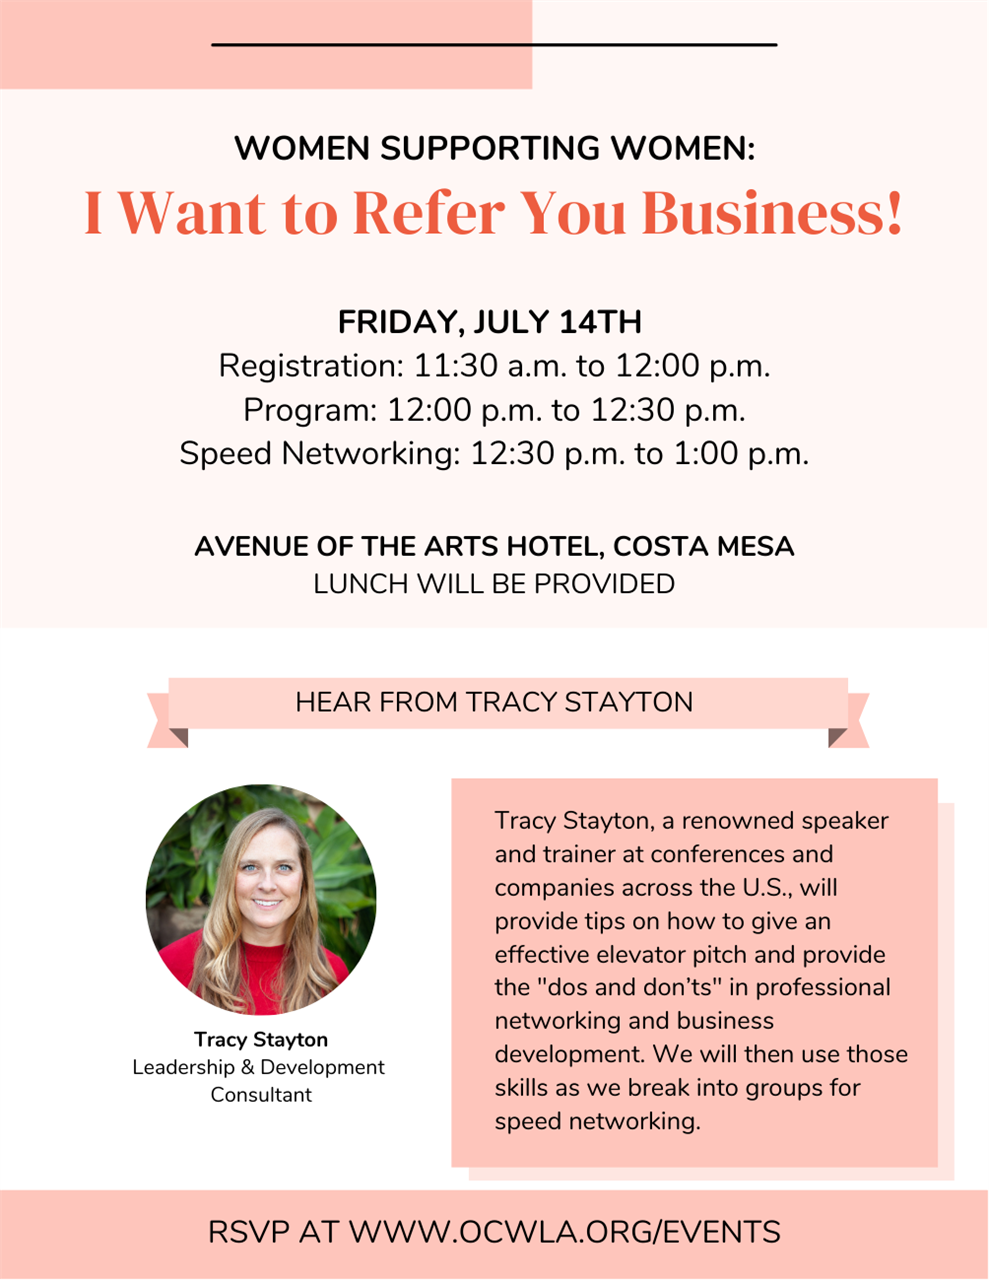 I Want to Refer You Business WOmen SUpporting WOmen Friday July 14th Hear from Tracy Stayton Tracy Stayton Leadership Development Consultant Tracy Stayton a renowned speaker and trainer at conferences and companies across the US will provide tips on how to give an effective elevator pitch and provide the dos and don ts in professional networking and business development We will then use those skills as we break into groups for speed networking Avenue of the Arts Hotel Costa Mesa Lunch will be provided